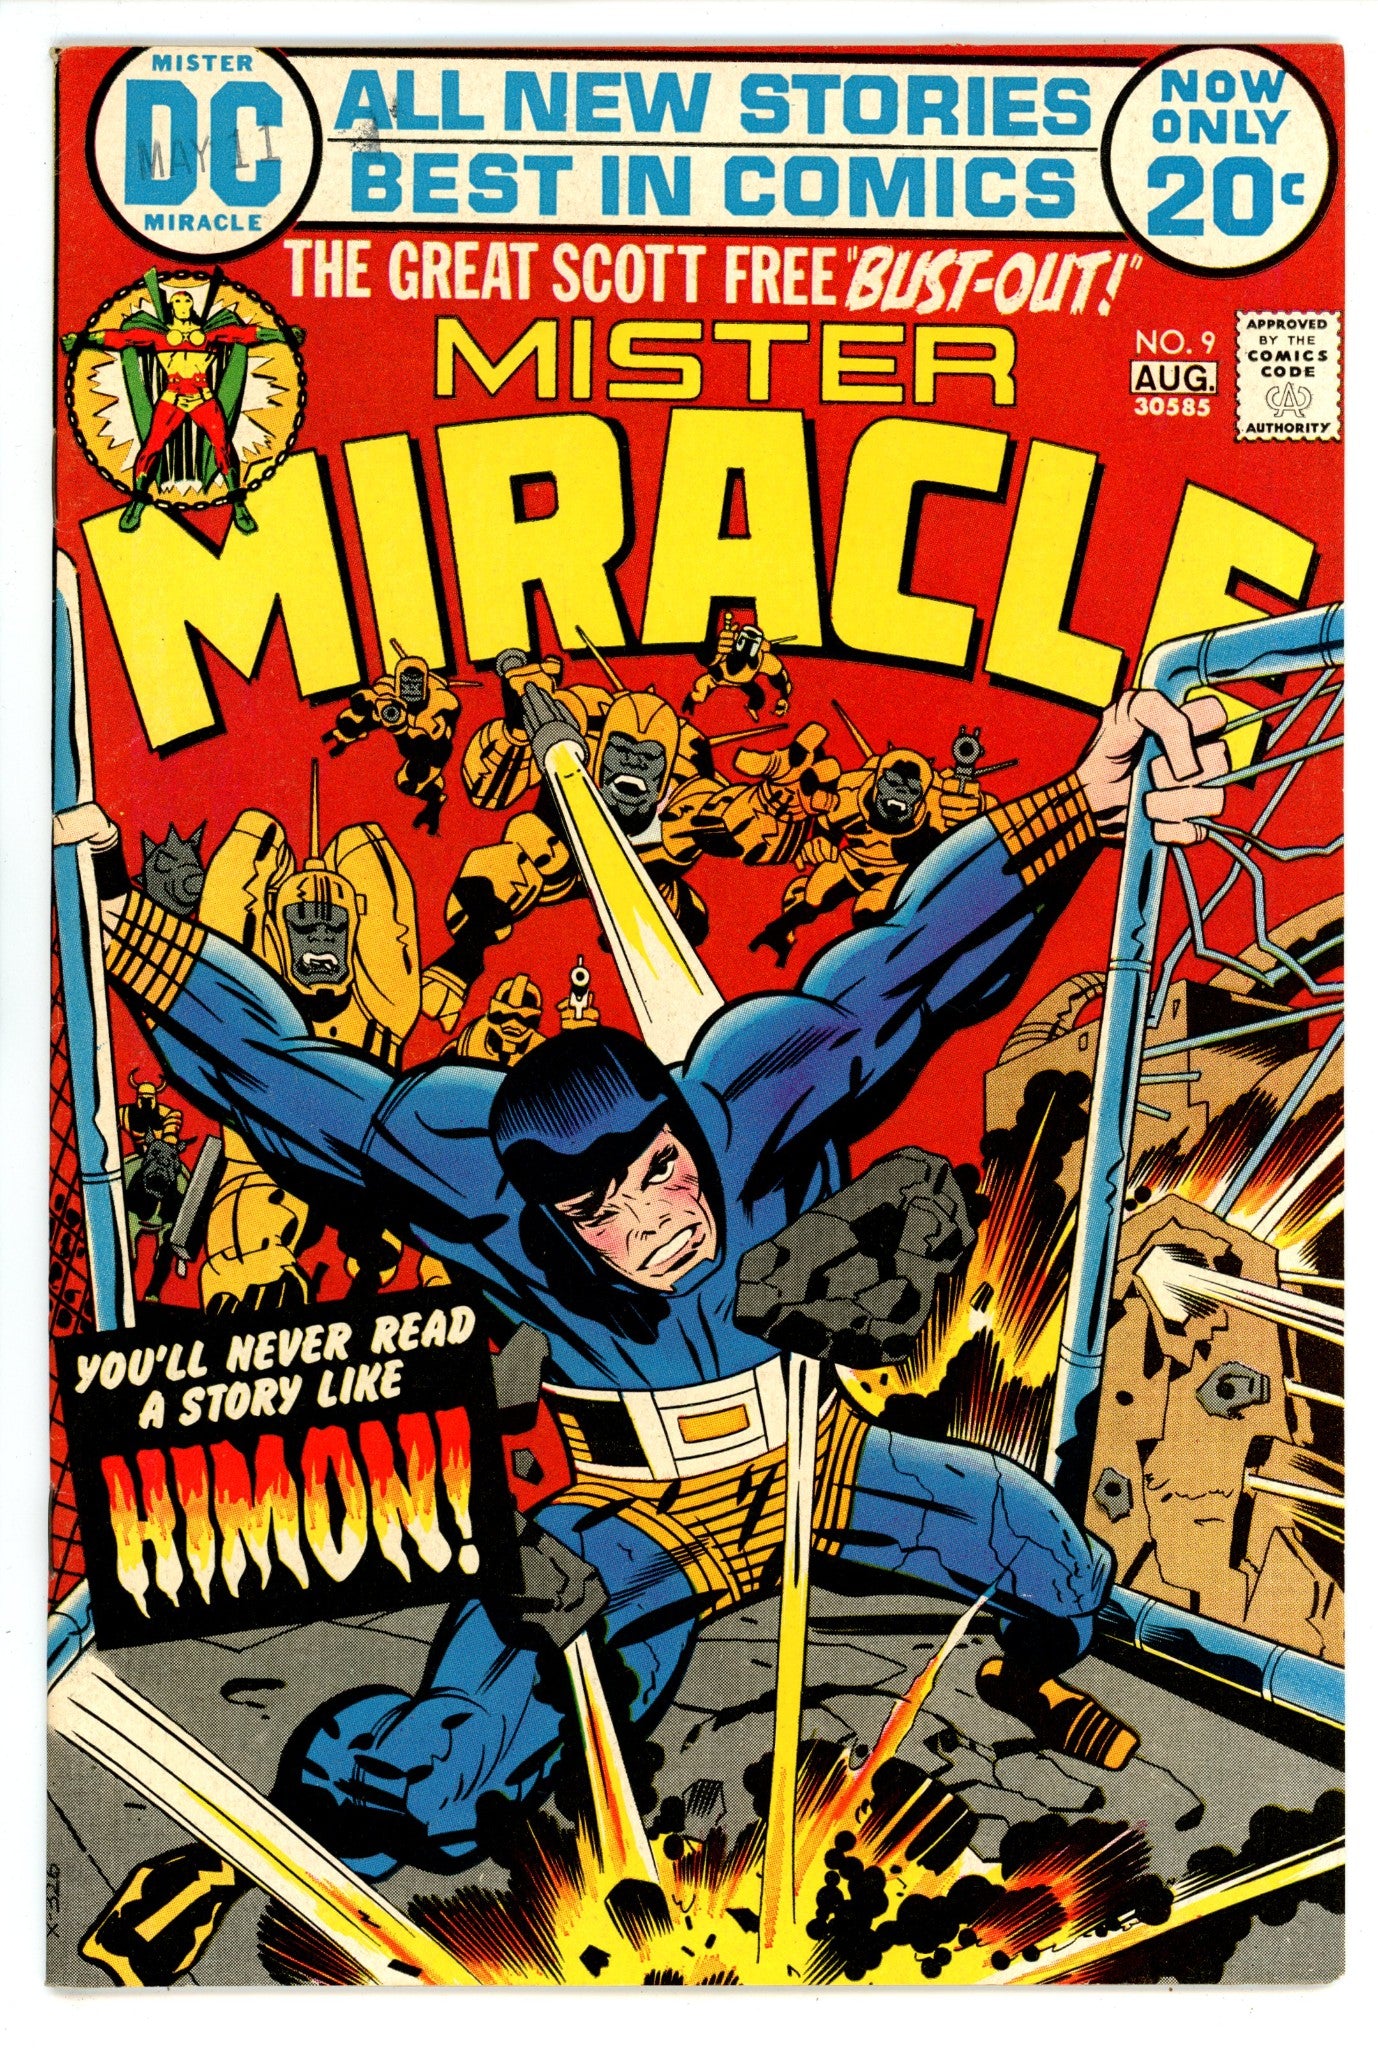 Mister Miracle Vol 1 9 VF+ (8.5) (1972) 